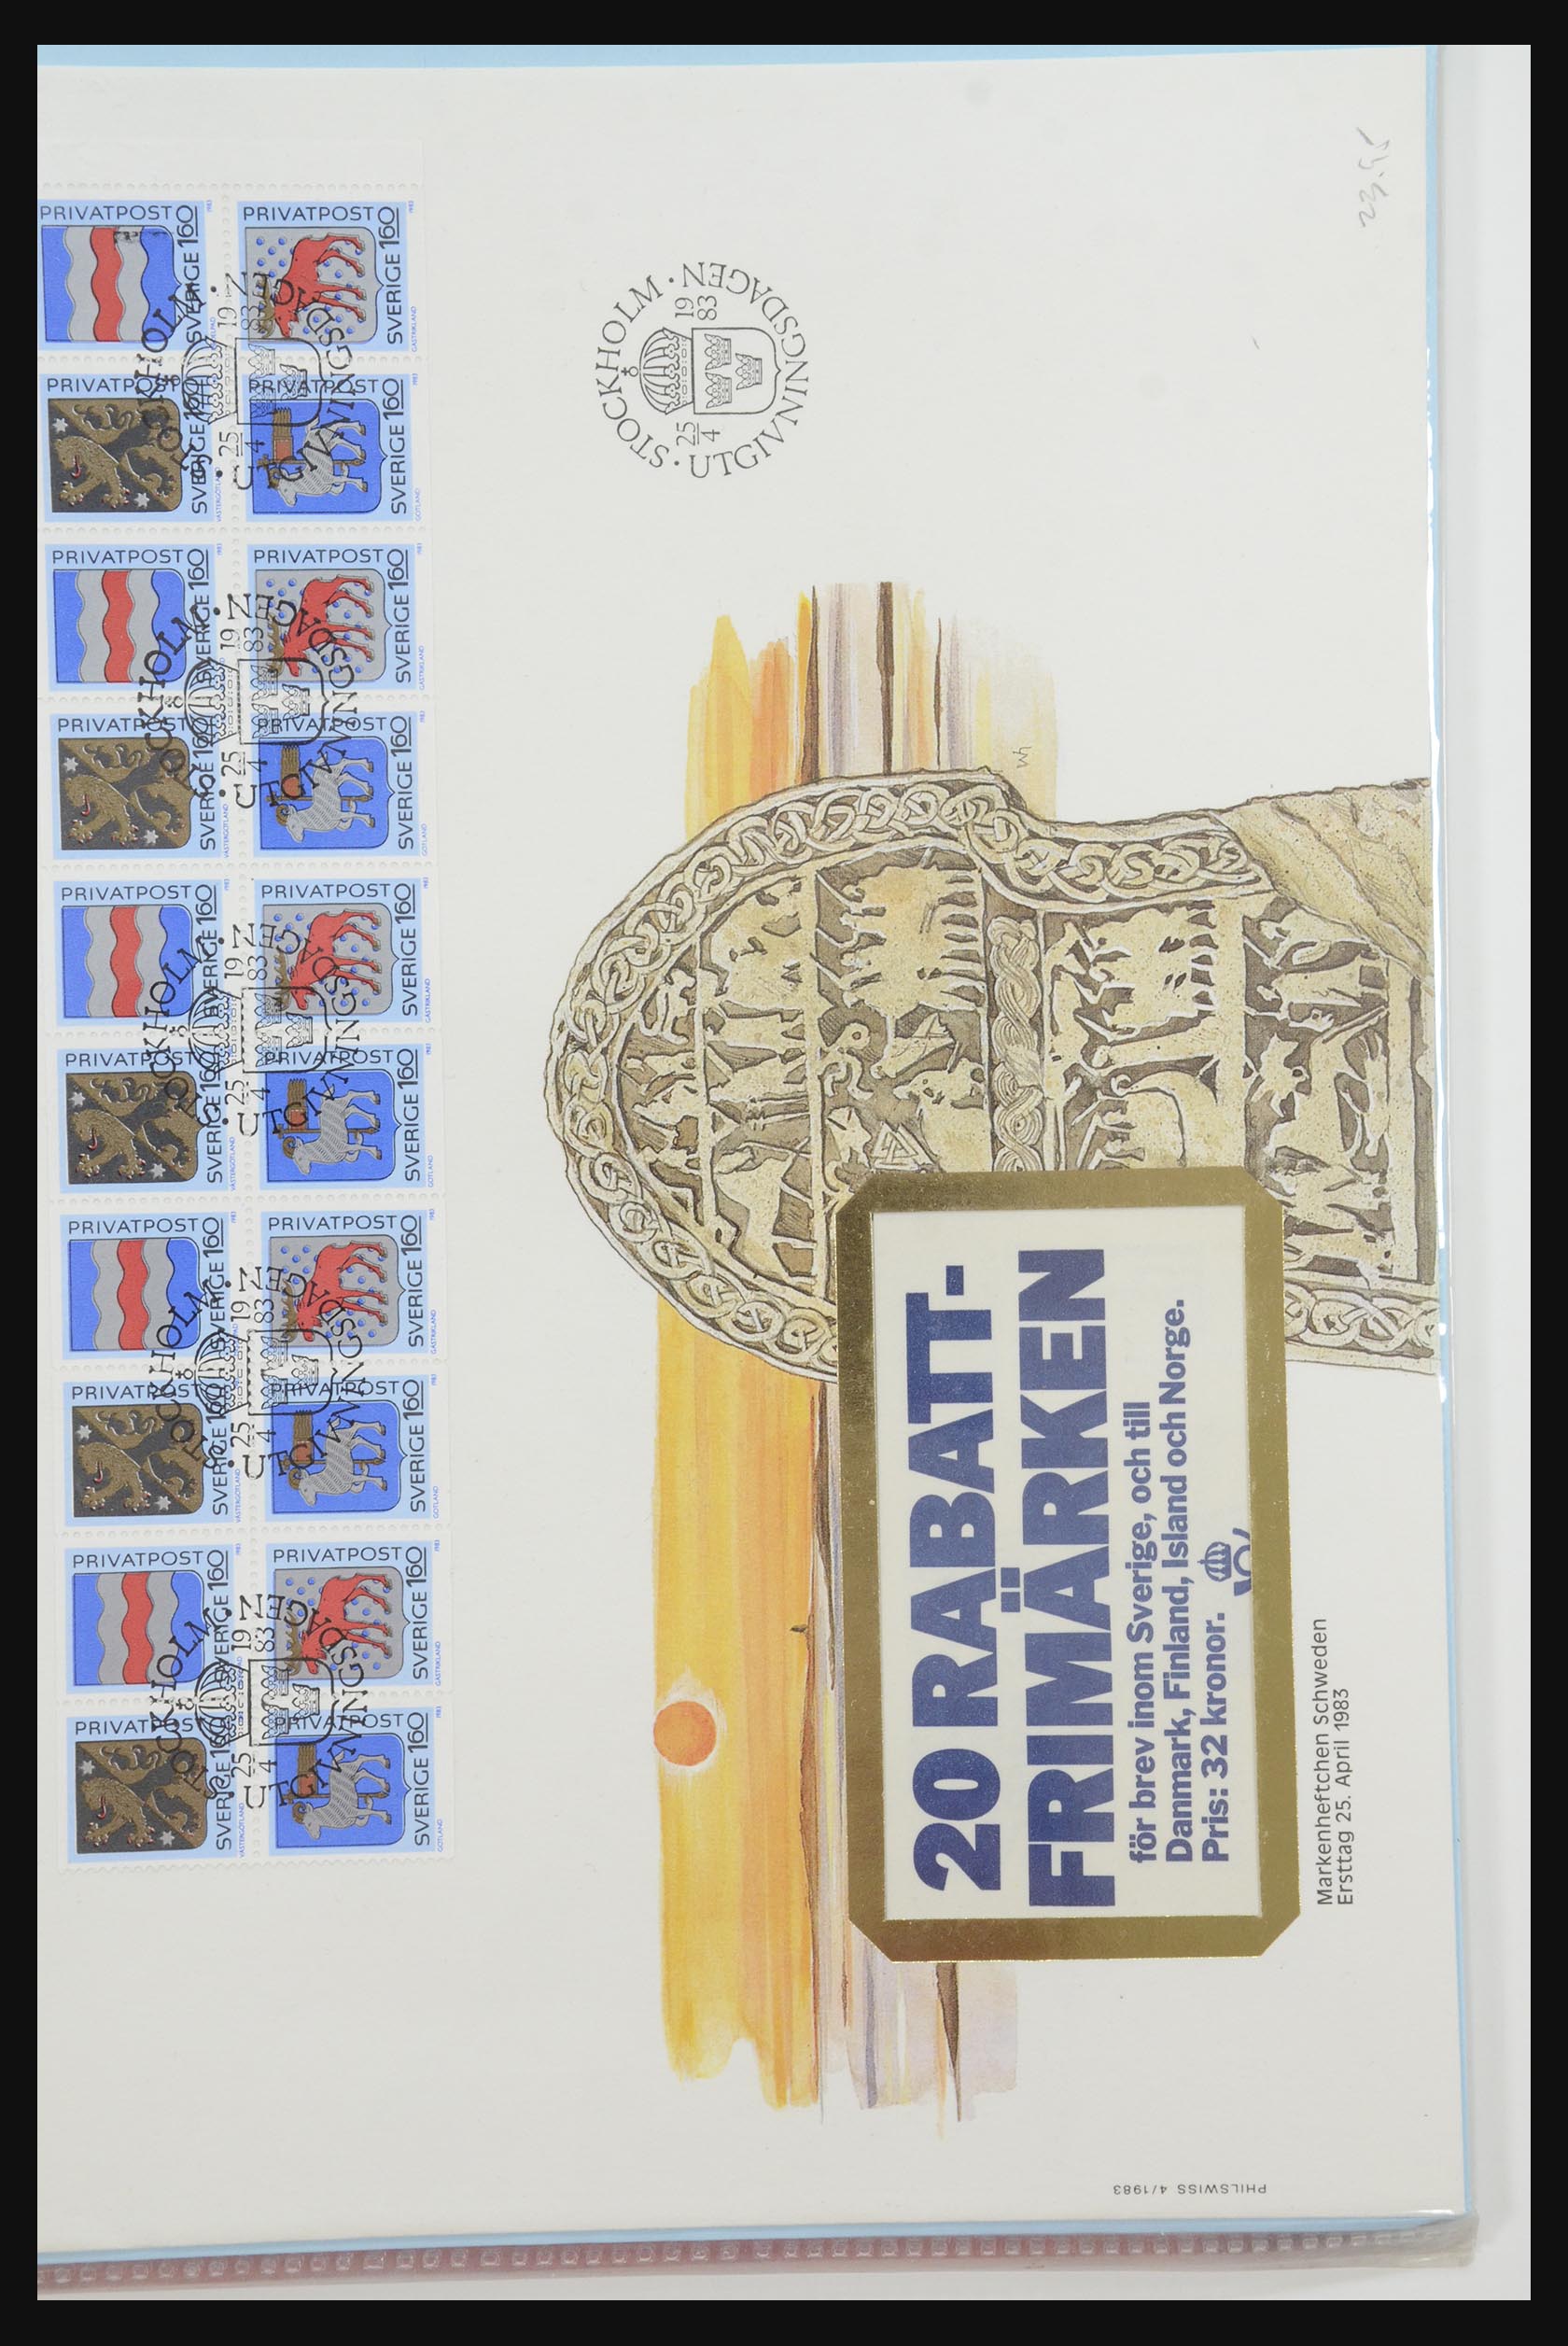 31915 389 - 31915 Western Europe souvenir sheets and stamp booklets on FDC.